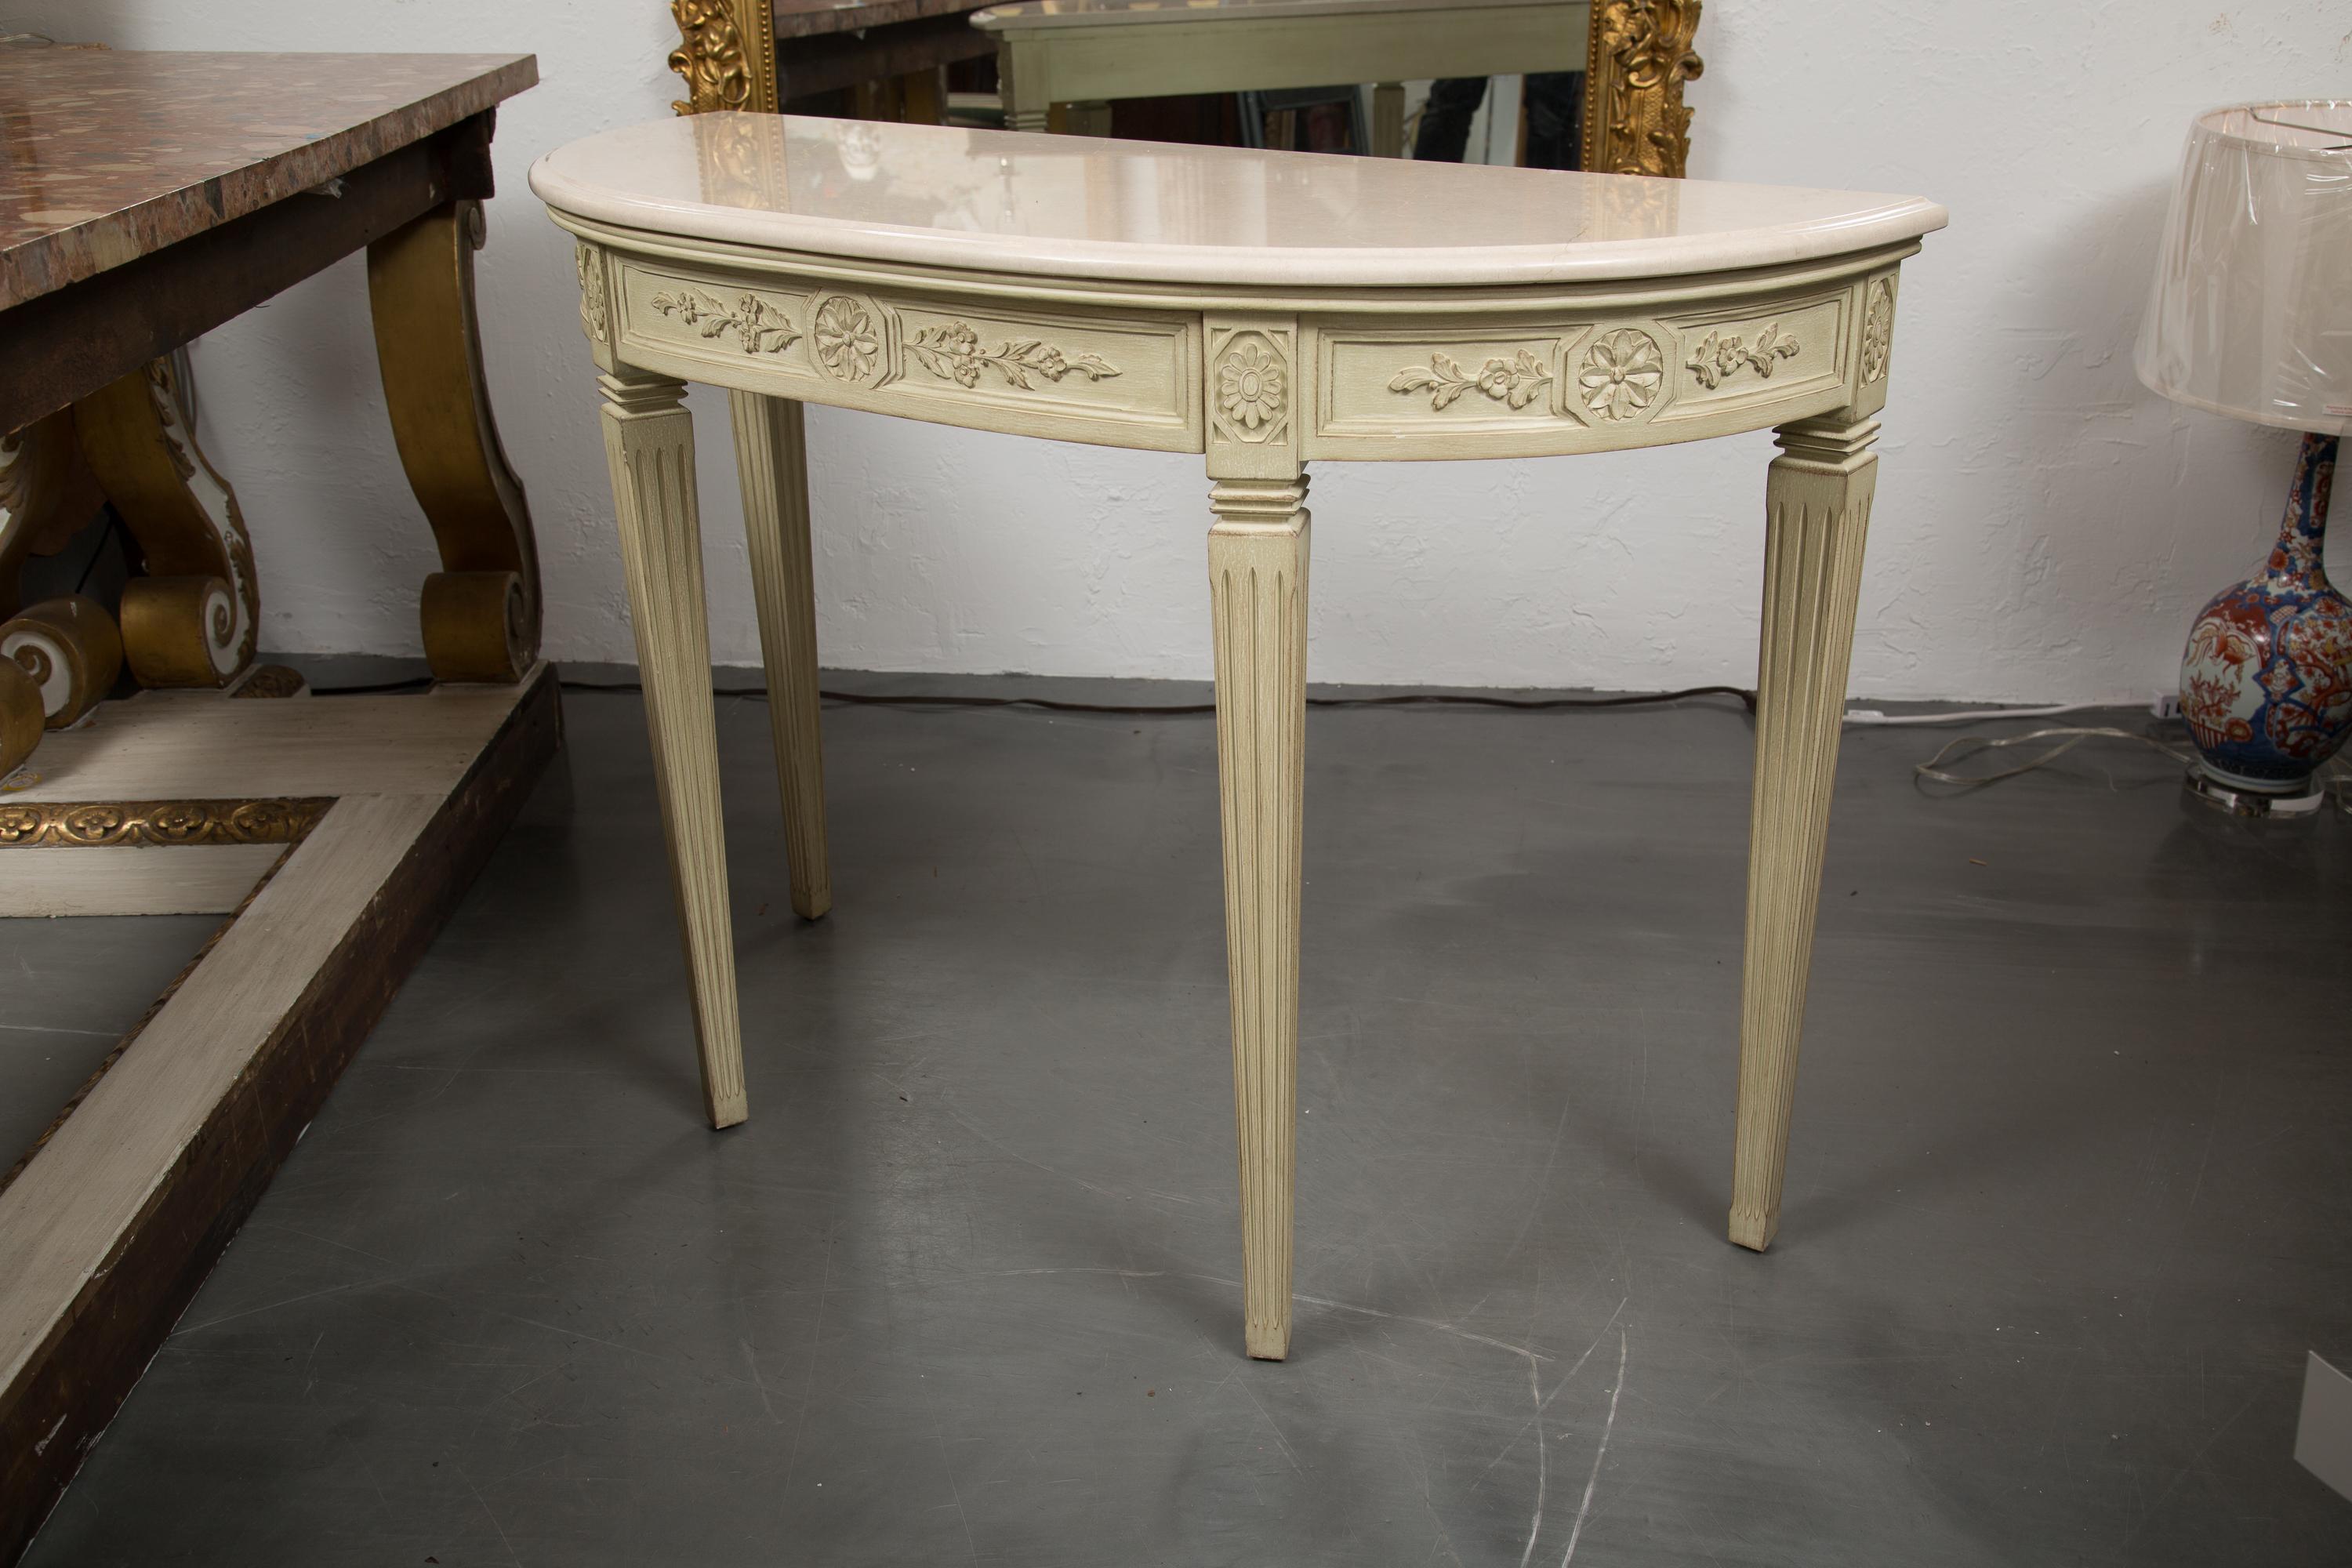 These are a Classic Italian hand carved and painted console tables. Each has a cream marble top over a carved frieze containing a central drawer. Both consoles are supported by square tapered fluted legs. Priced as a single item.